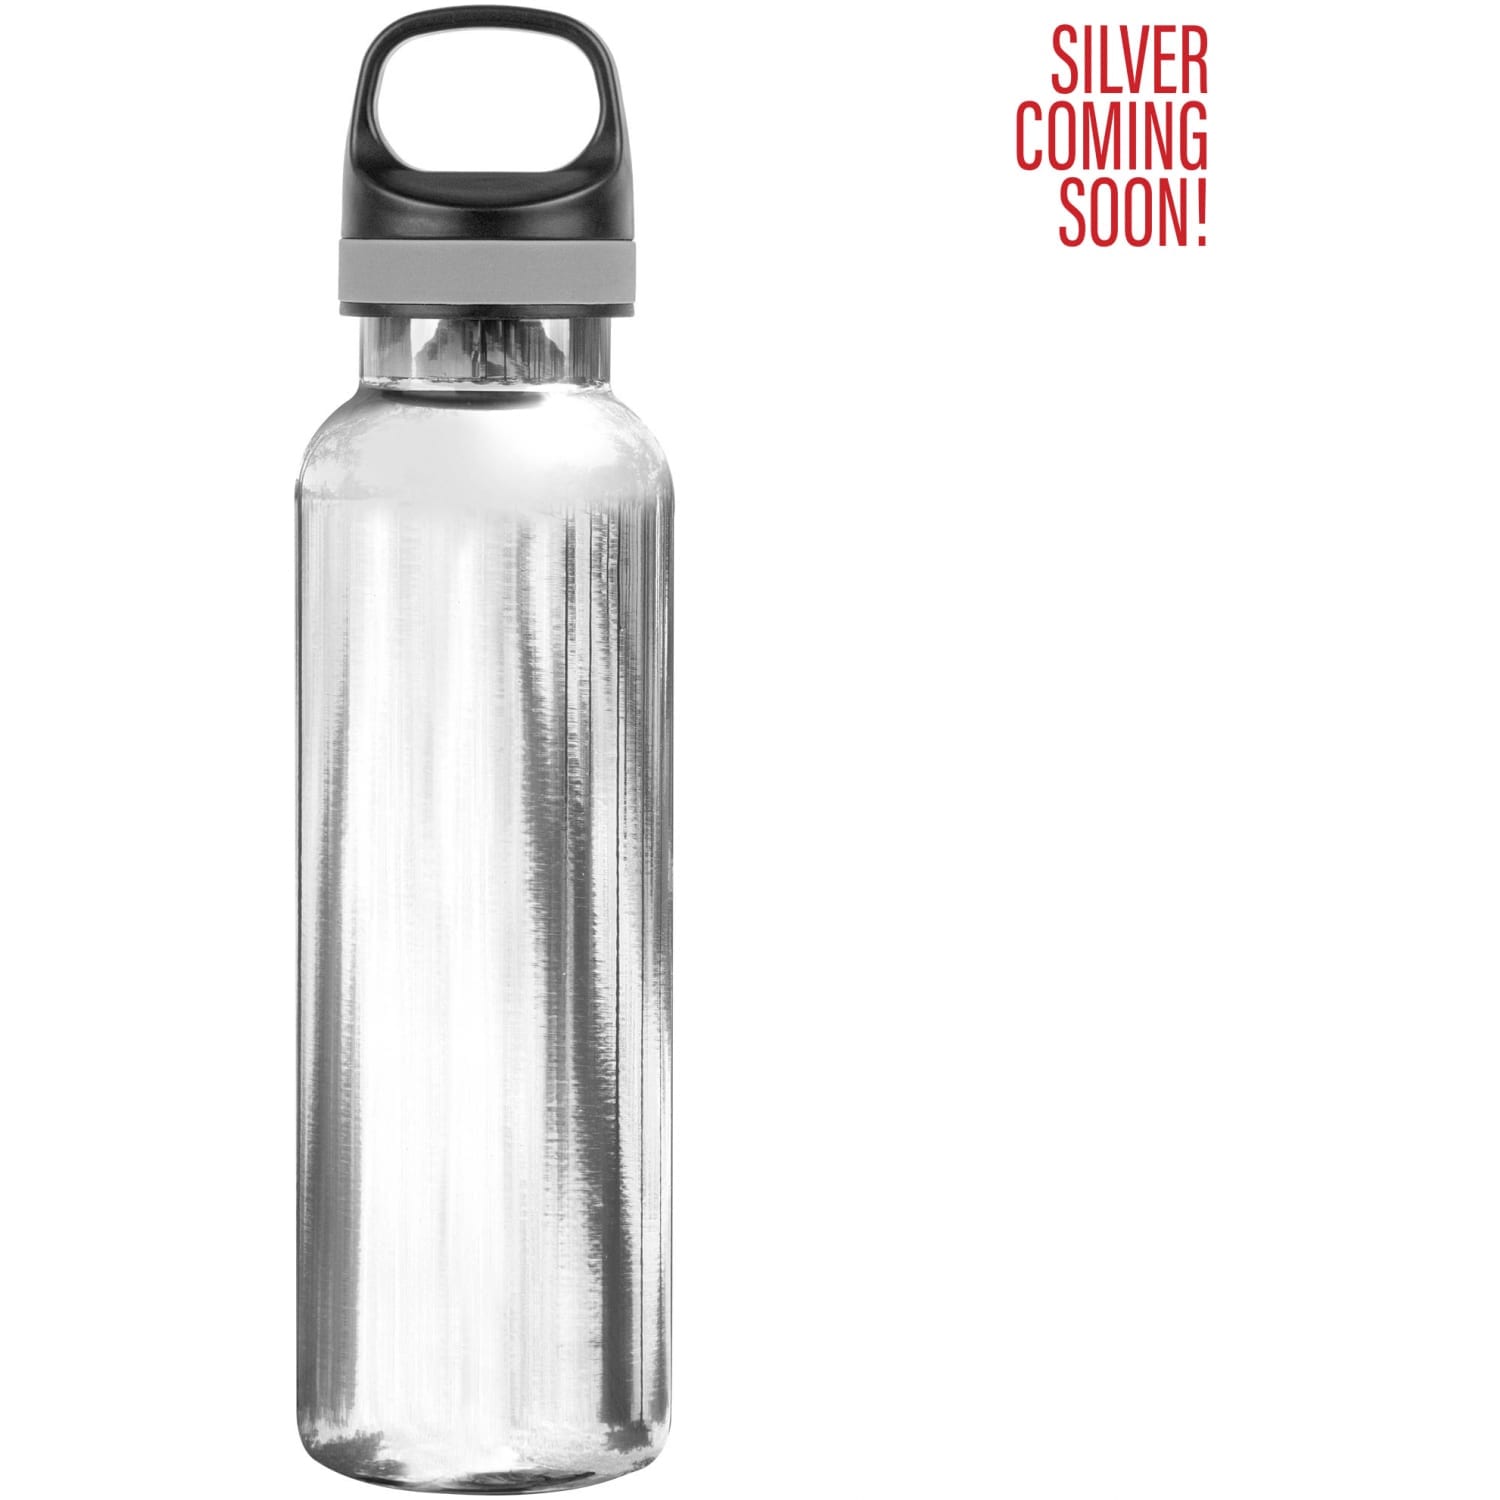 Promotional 20 oz.embark vacuum insulated water bottle with copper